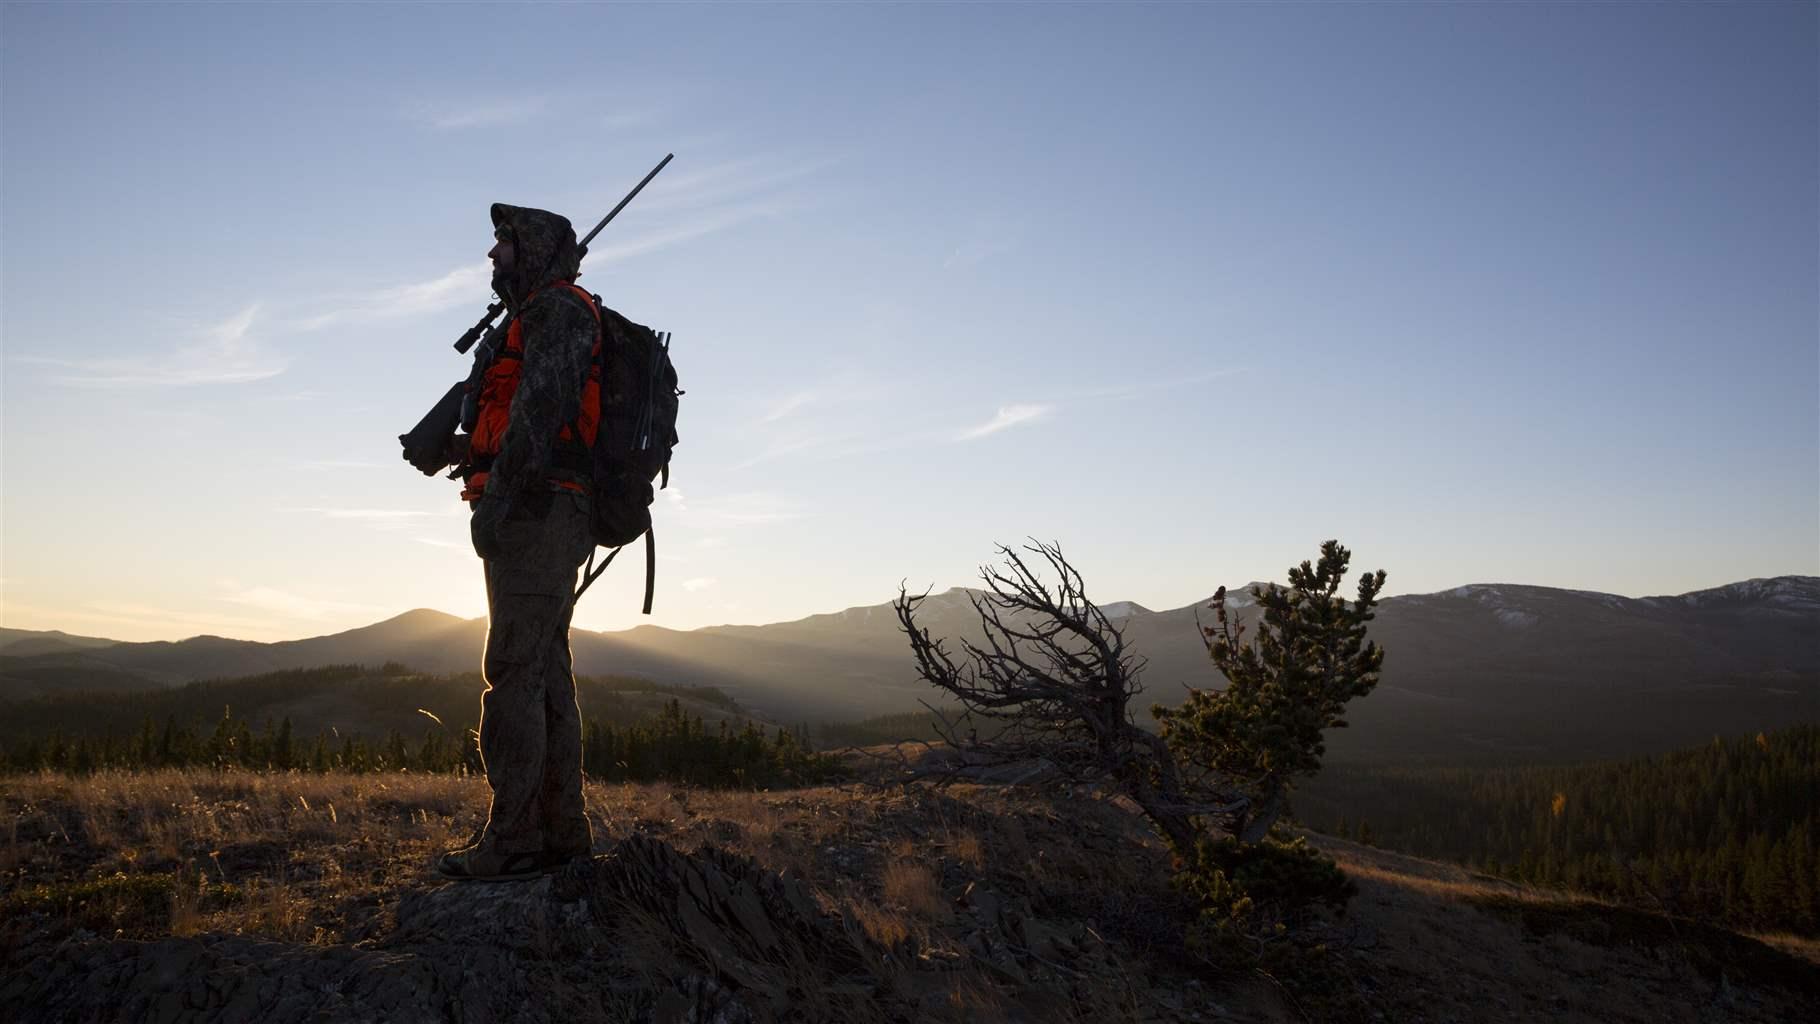 A hunter, carrying a backpack and with a rifle slung over his shoulder, stands in silhouette at dusk with mountains in the distance.